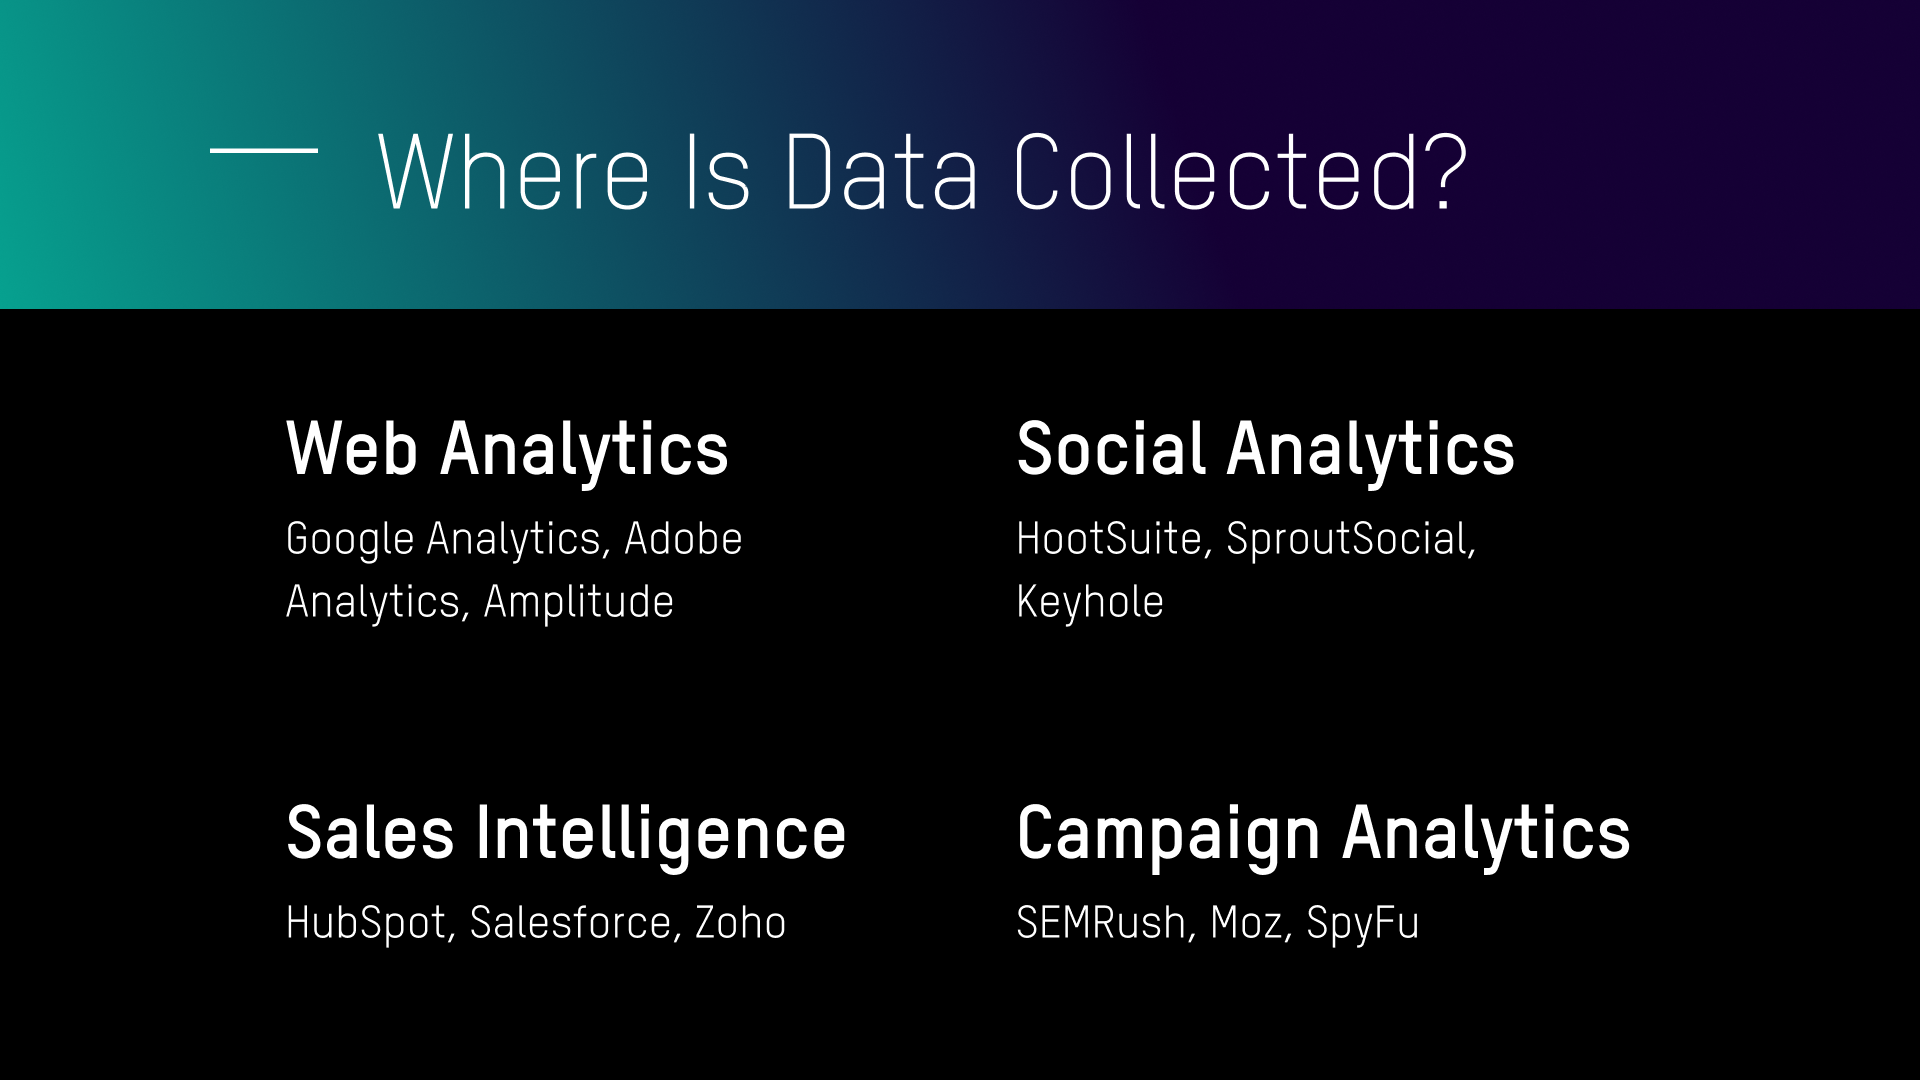 Where is Data Collected?